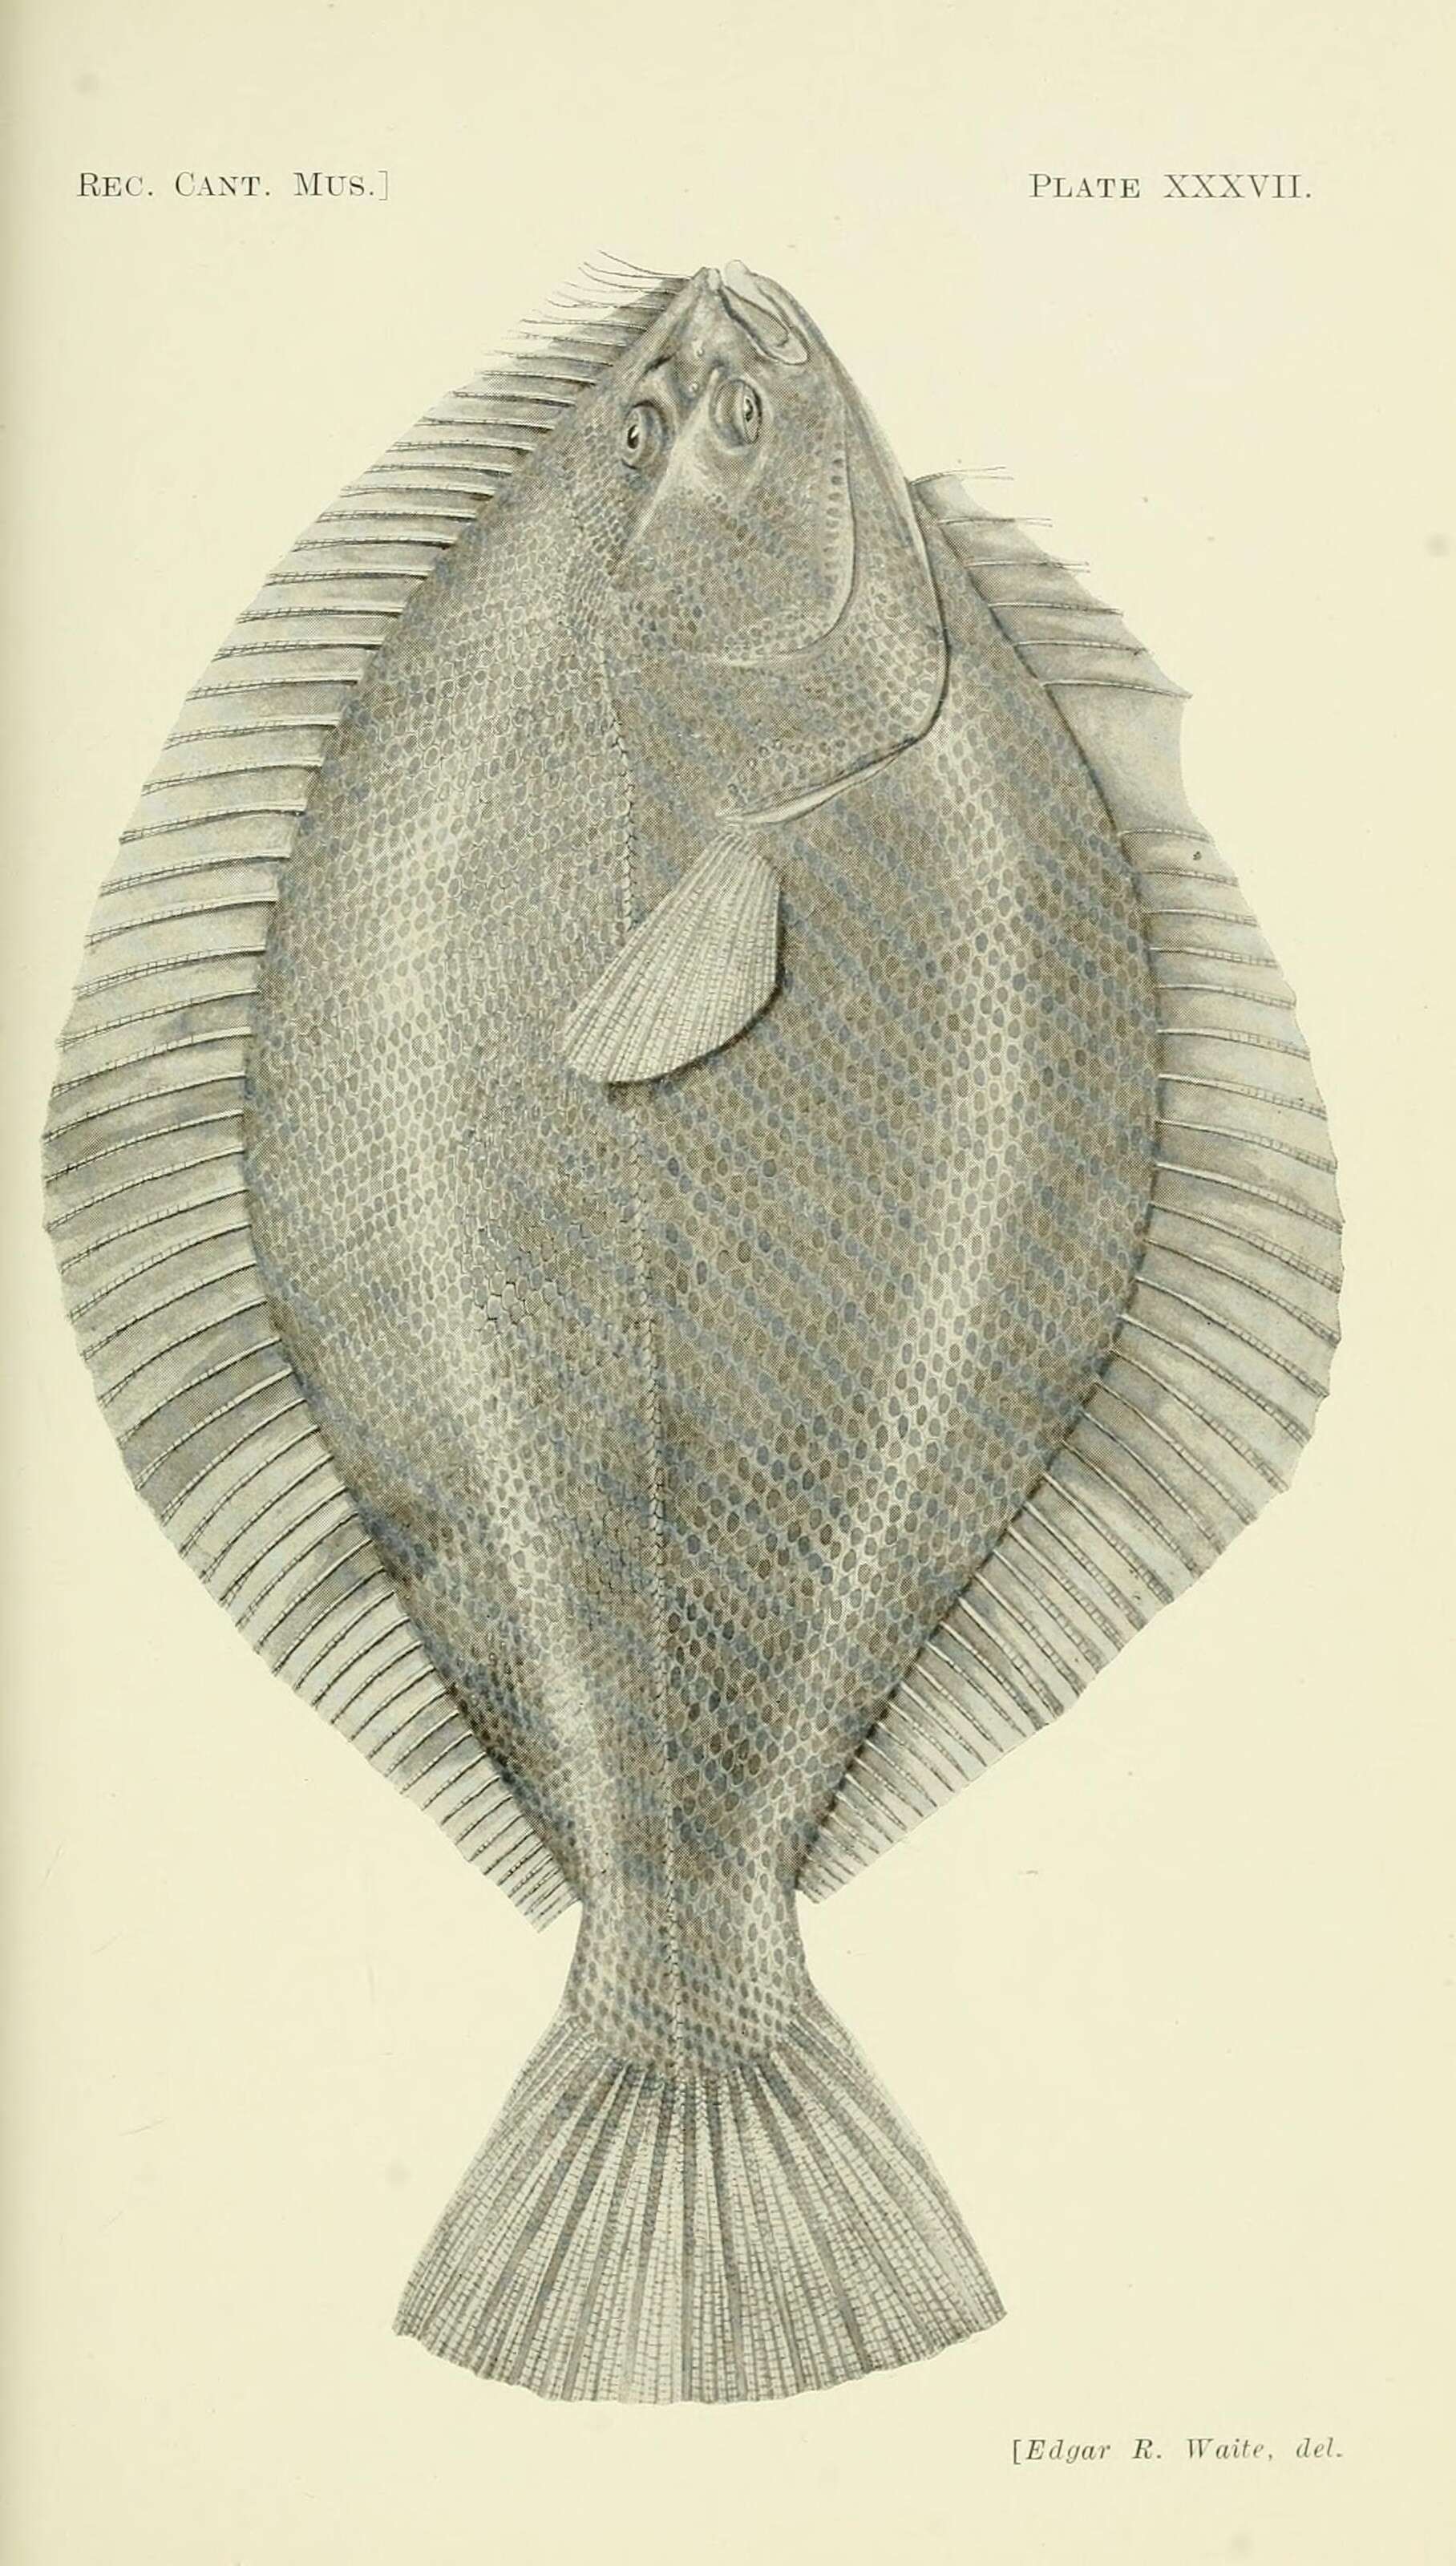 Image of Yellowbelly flounder